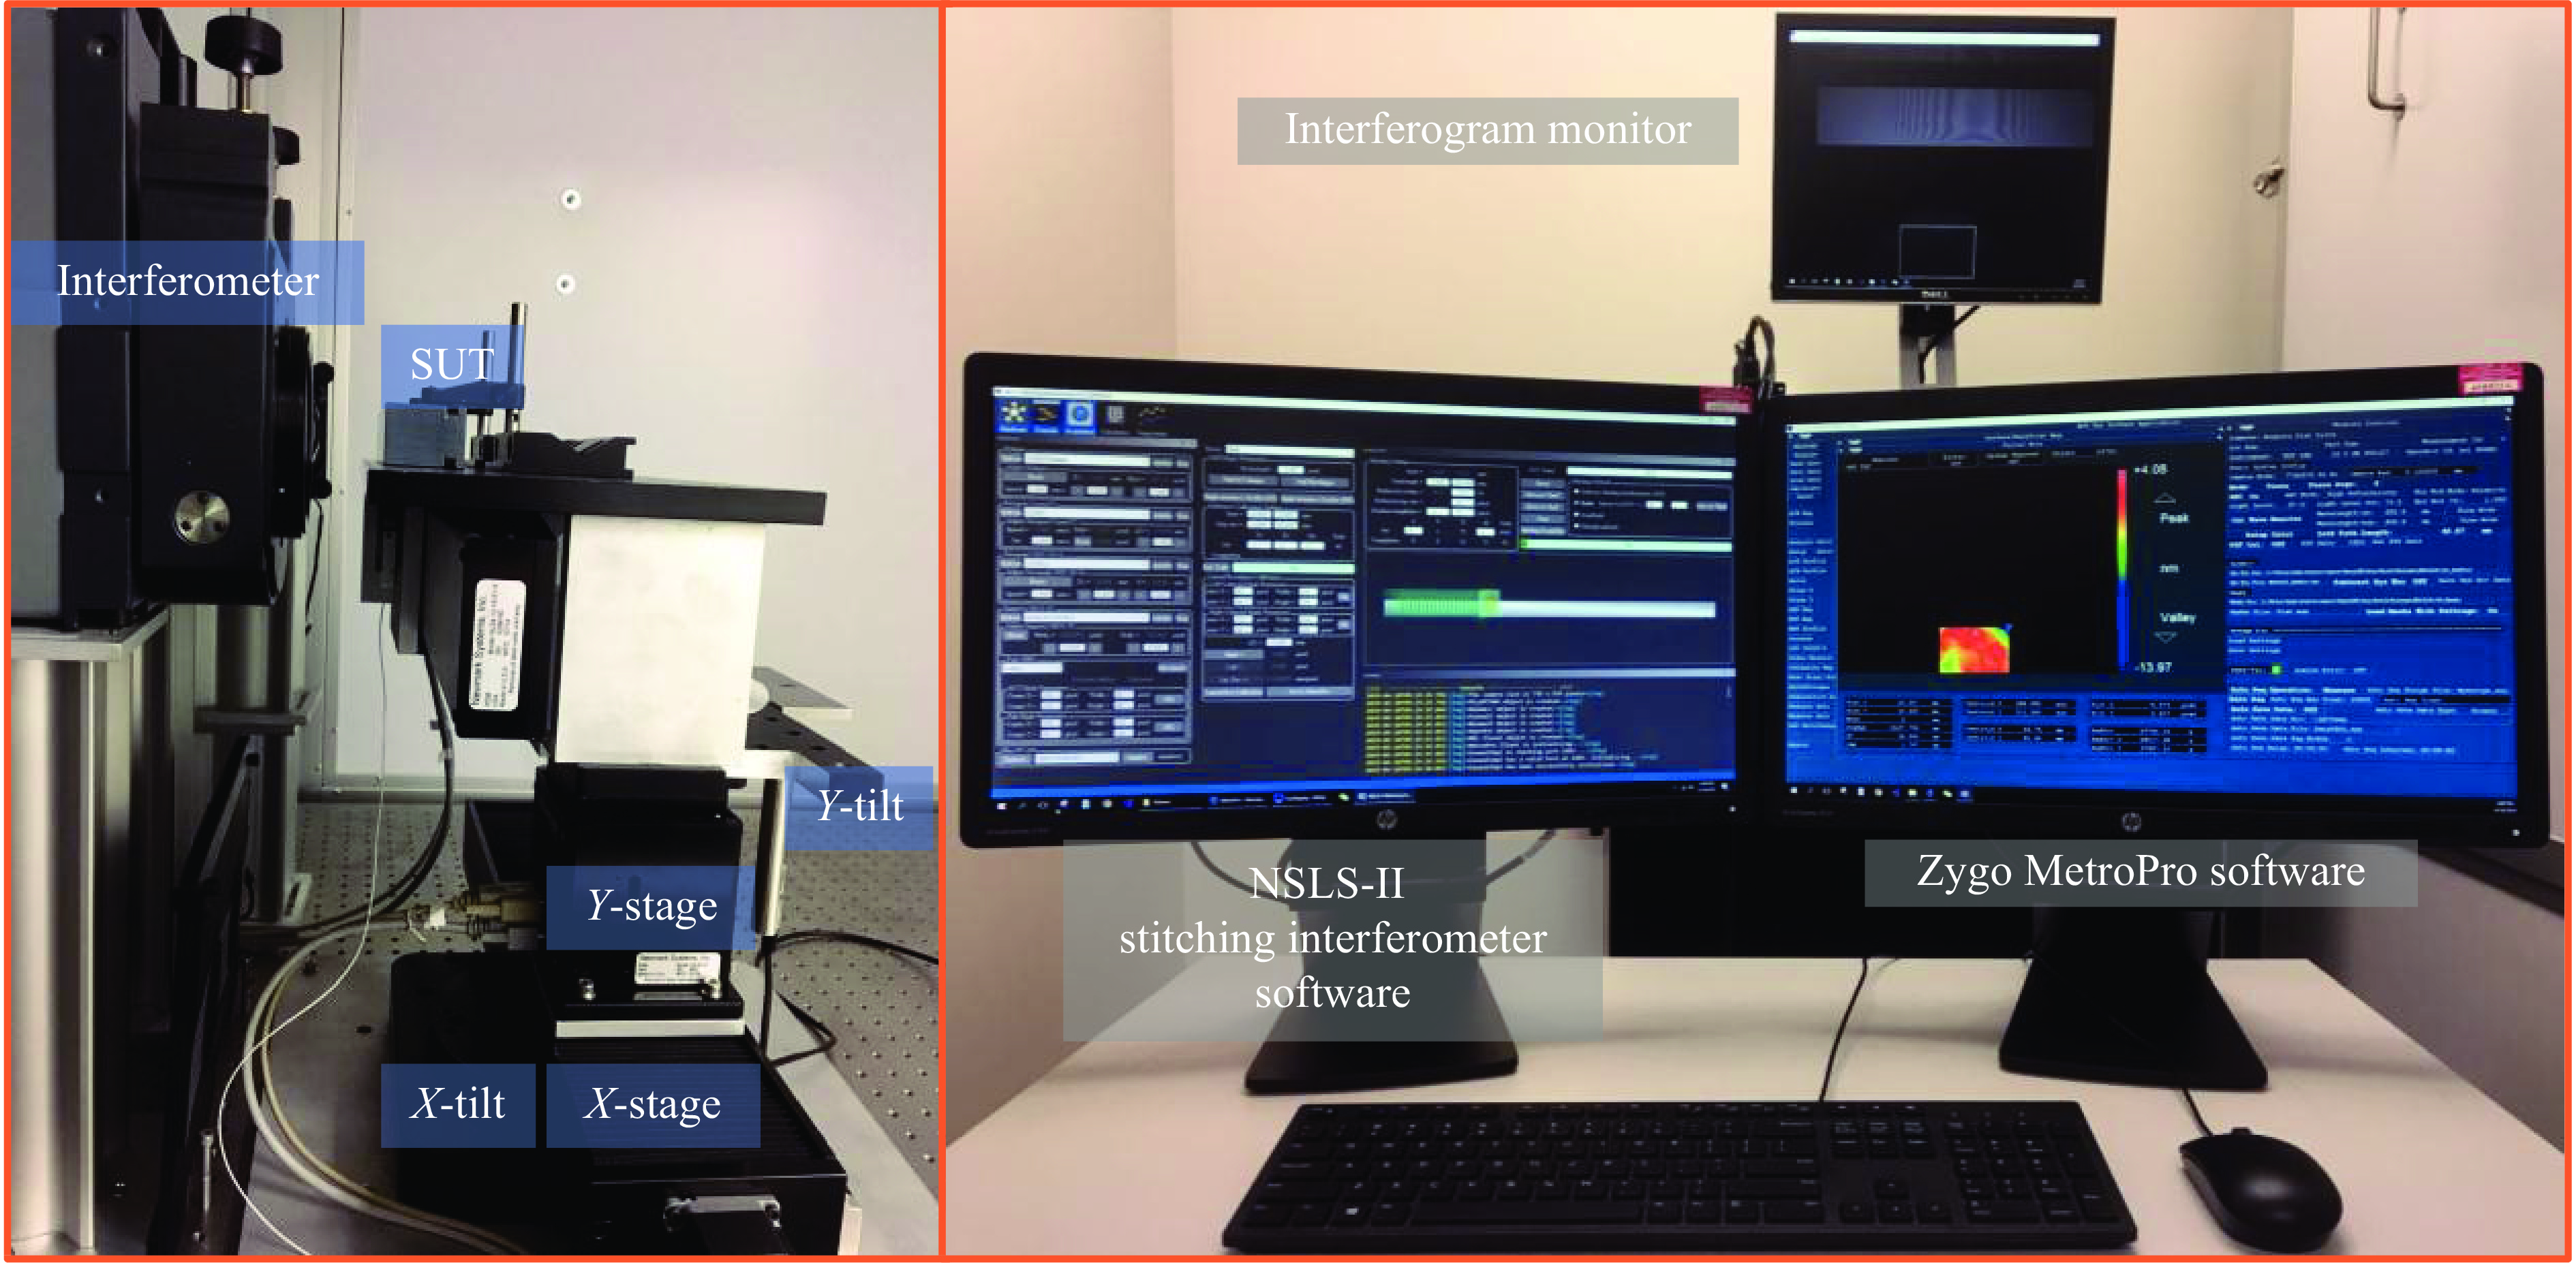 Photos of the hardware and the software interface in the NSLS-II stitching platform